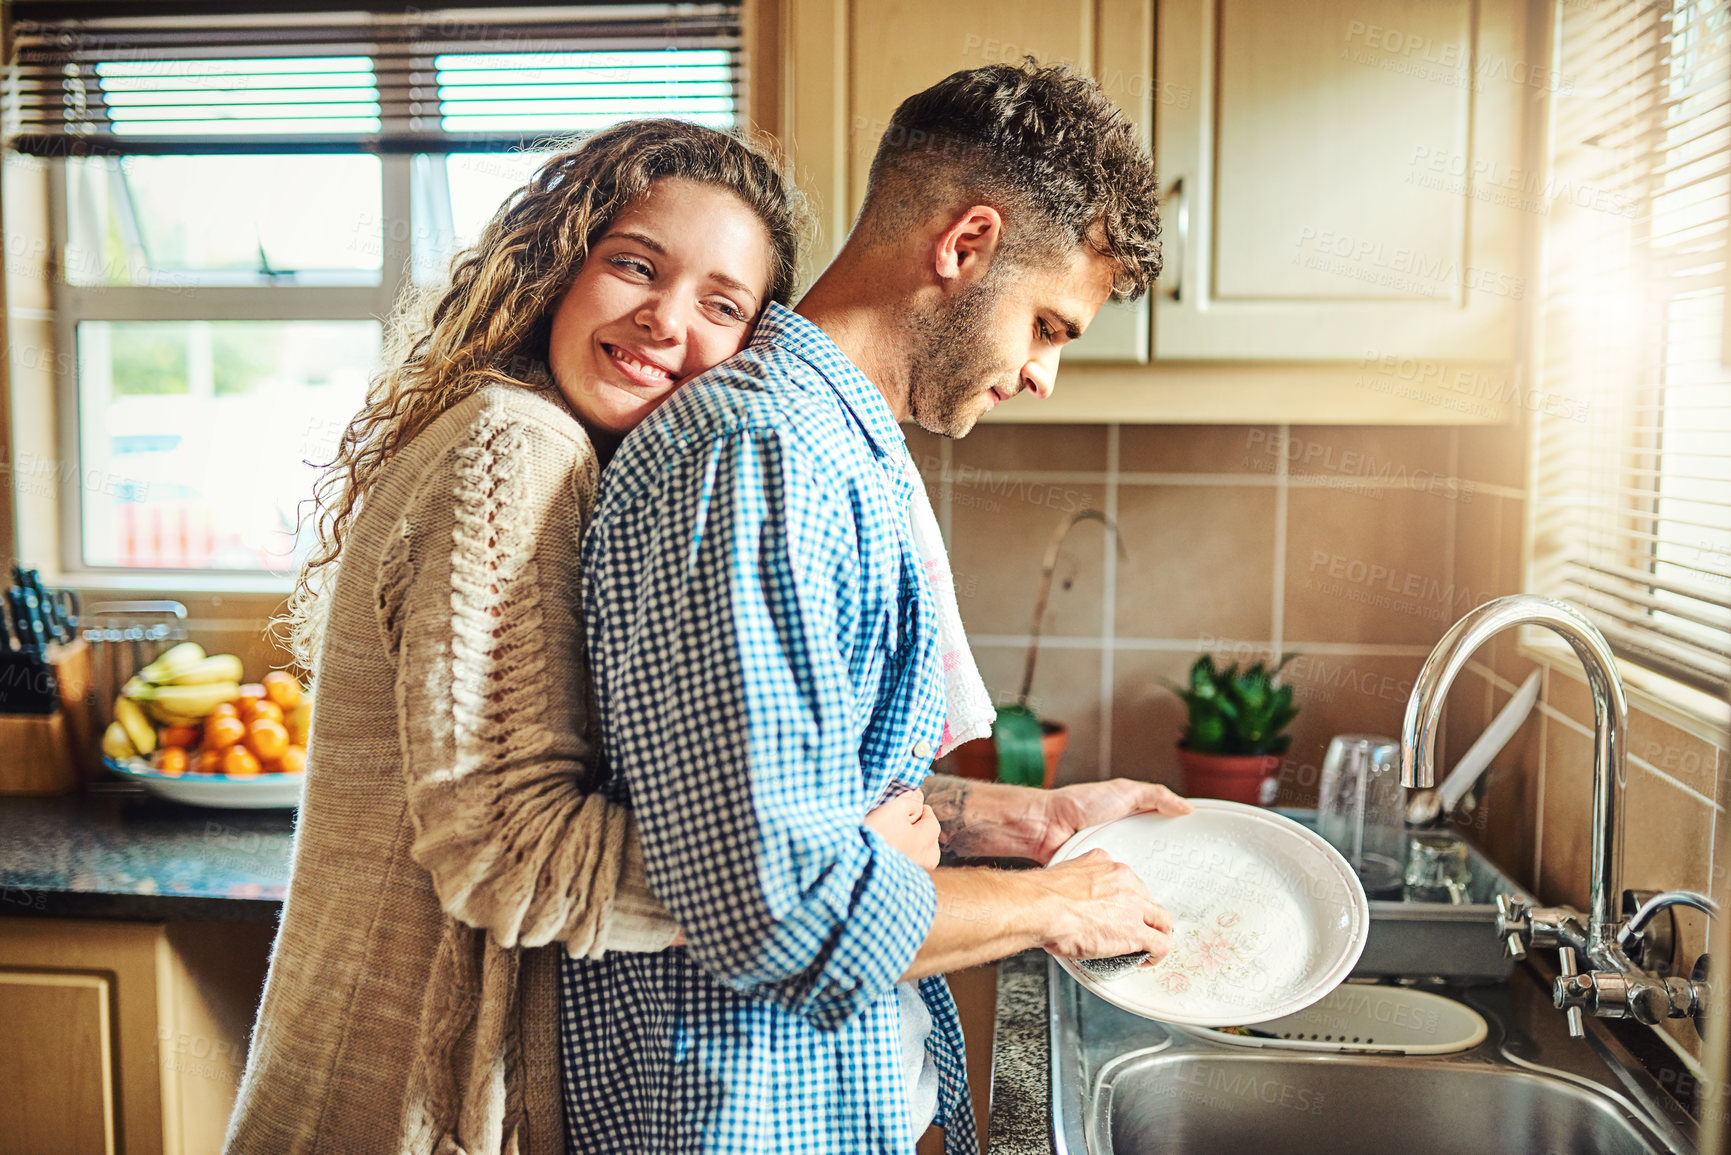 Buy stock photo Shot of a young woman embracing her boyfriend from behind while he does the dishes